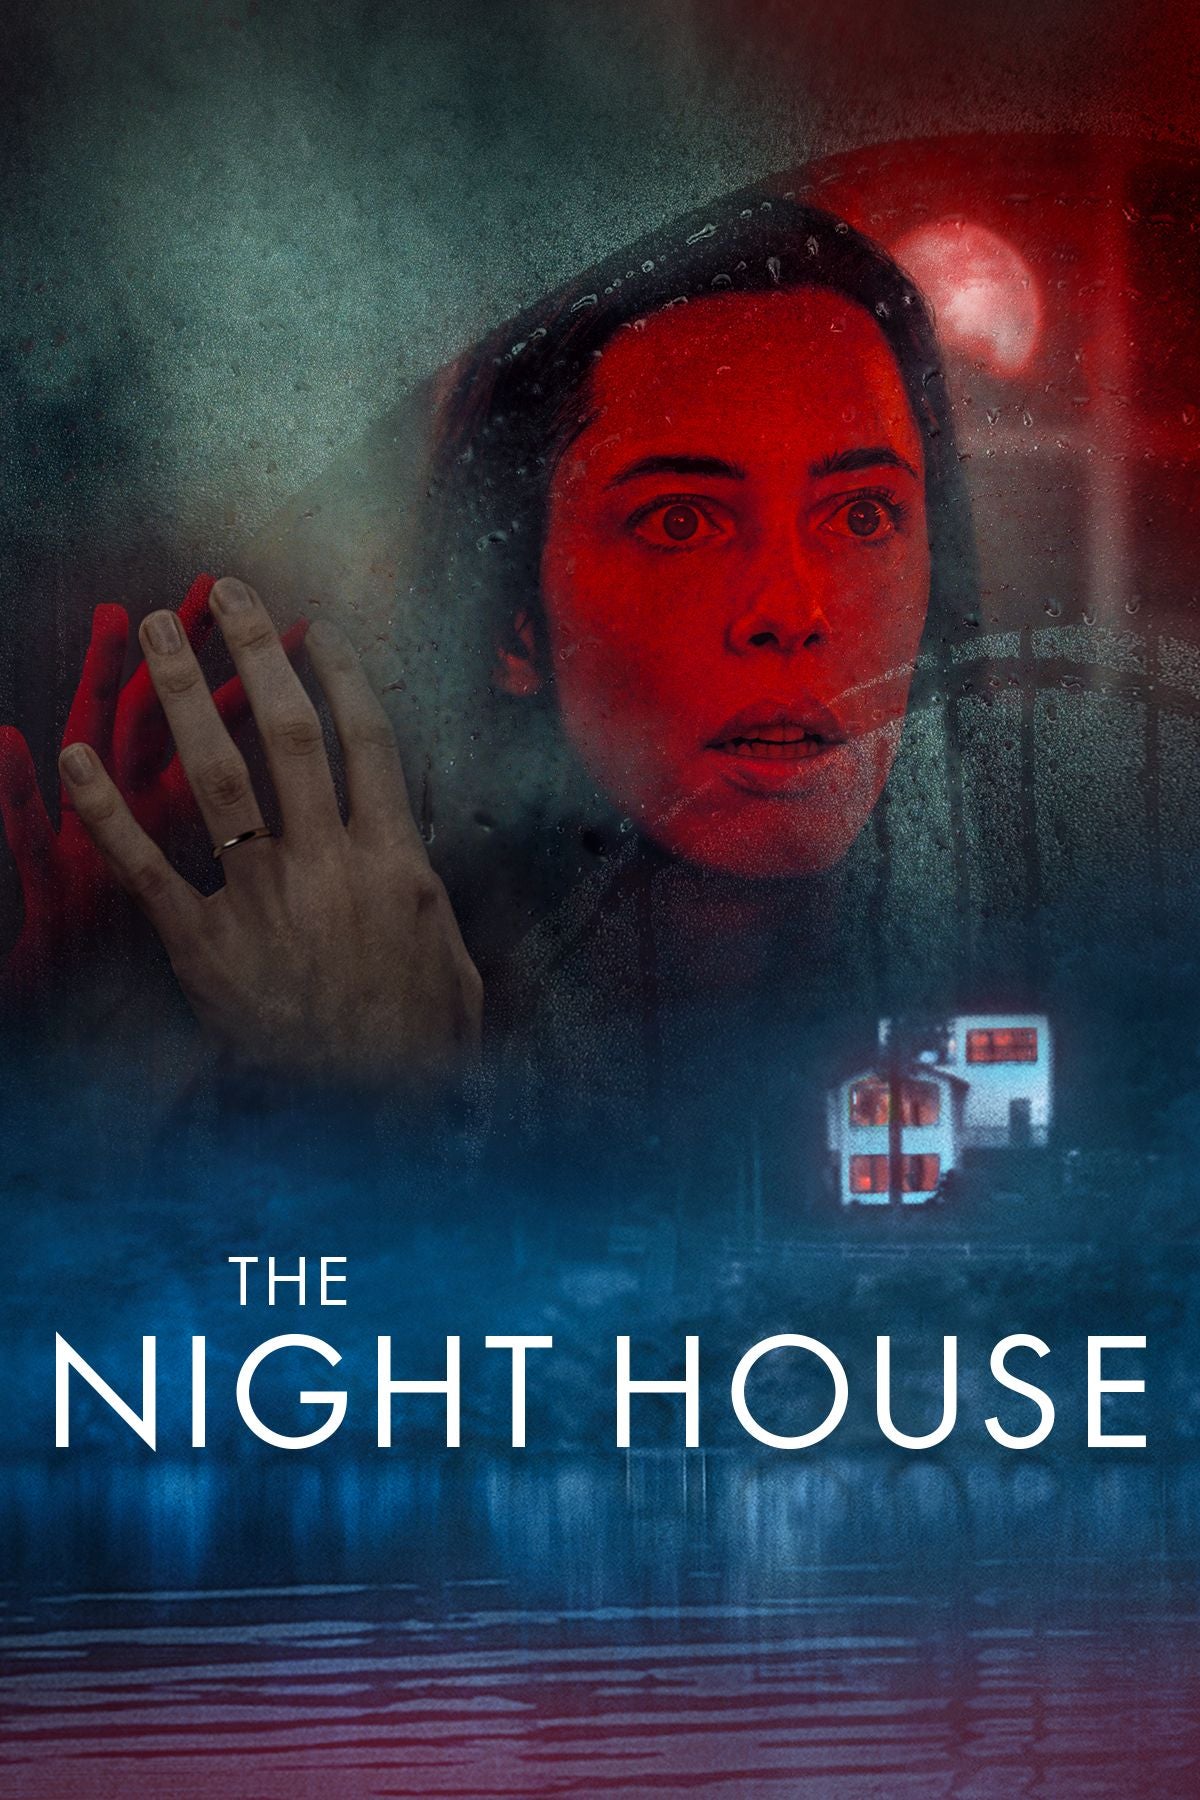 The Night House (2021) Vudu or Movies Anywhere HD redemption only